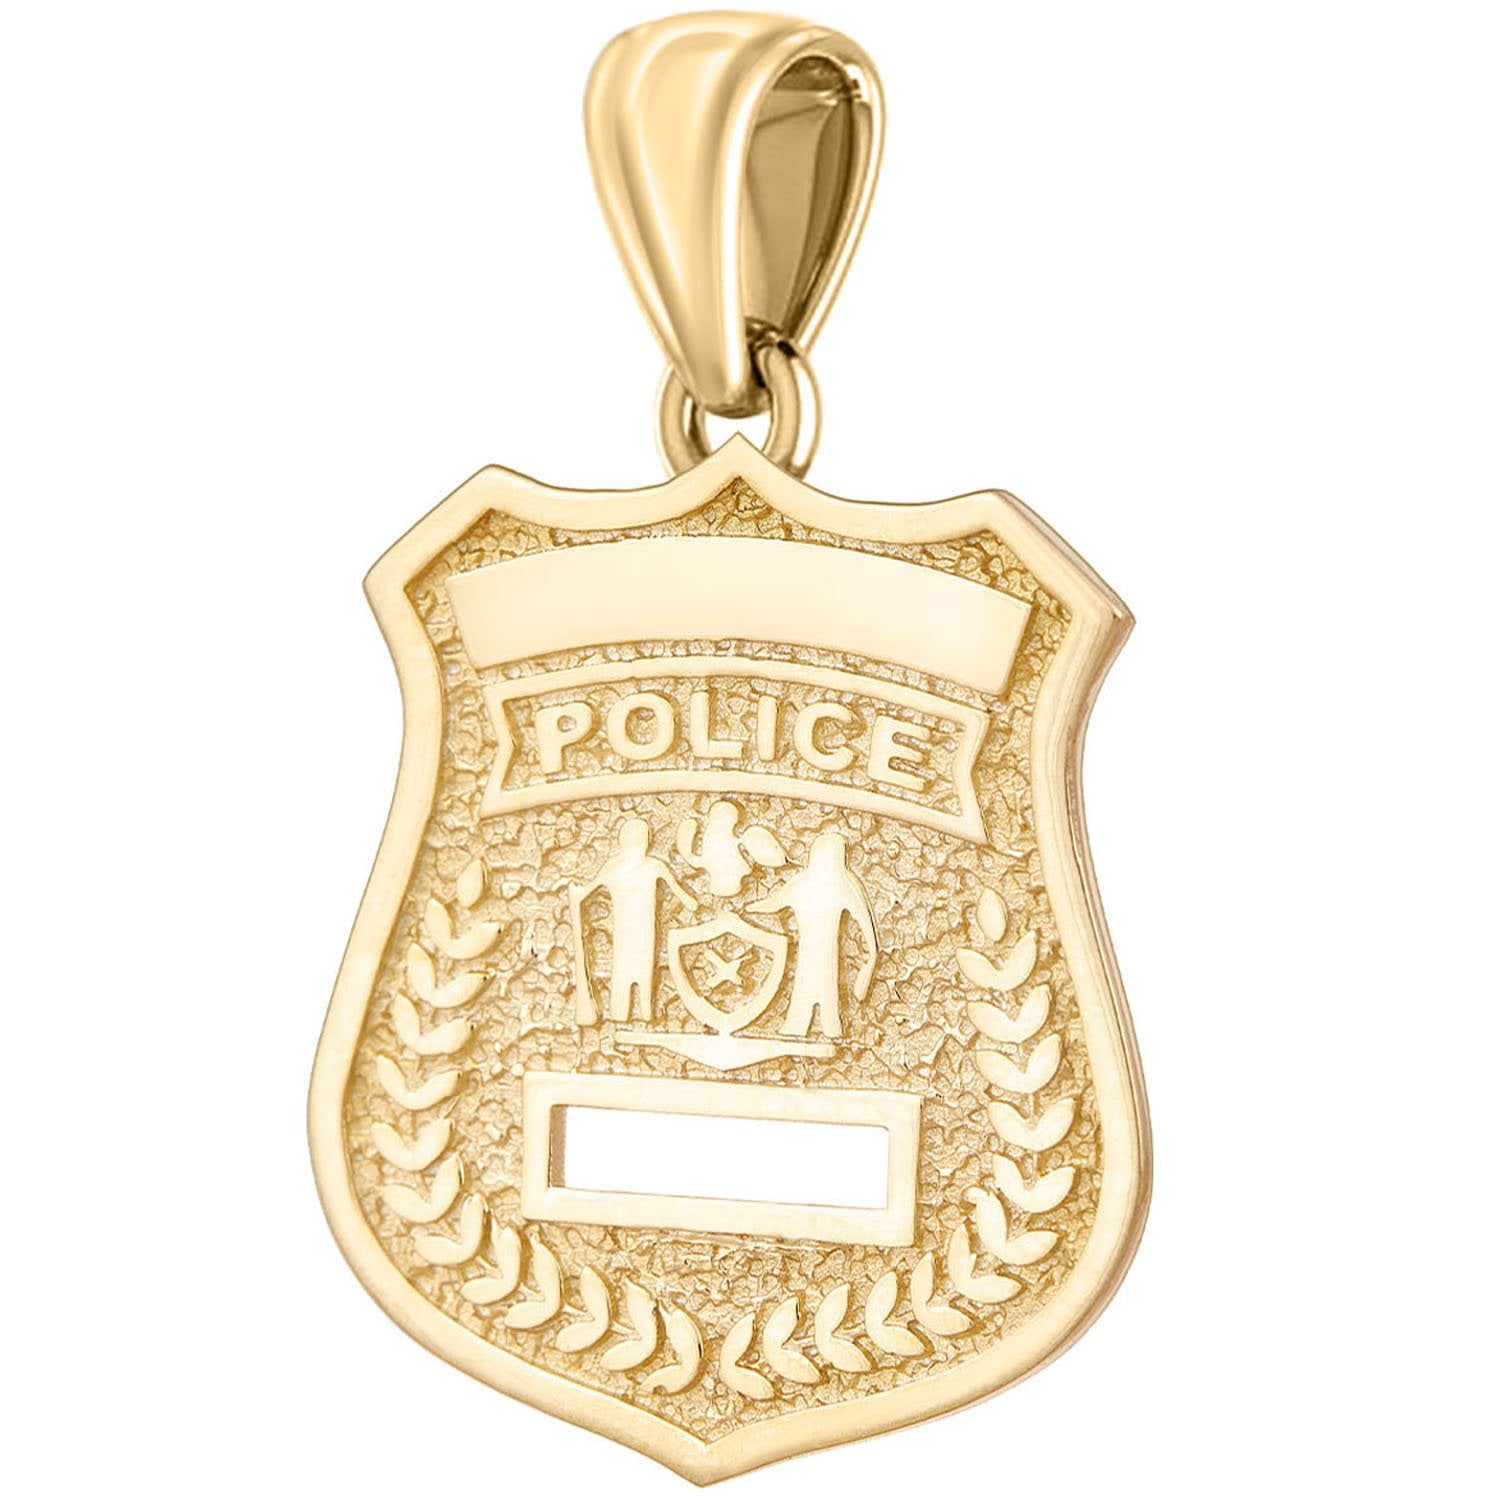 Gold Police Badge Necklace Without Chain - Crafted For Men